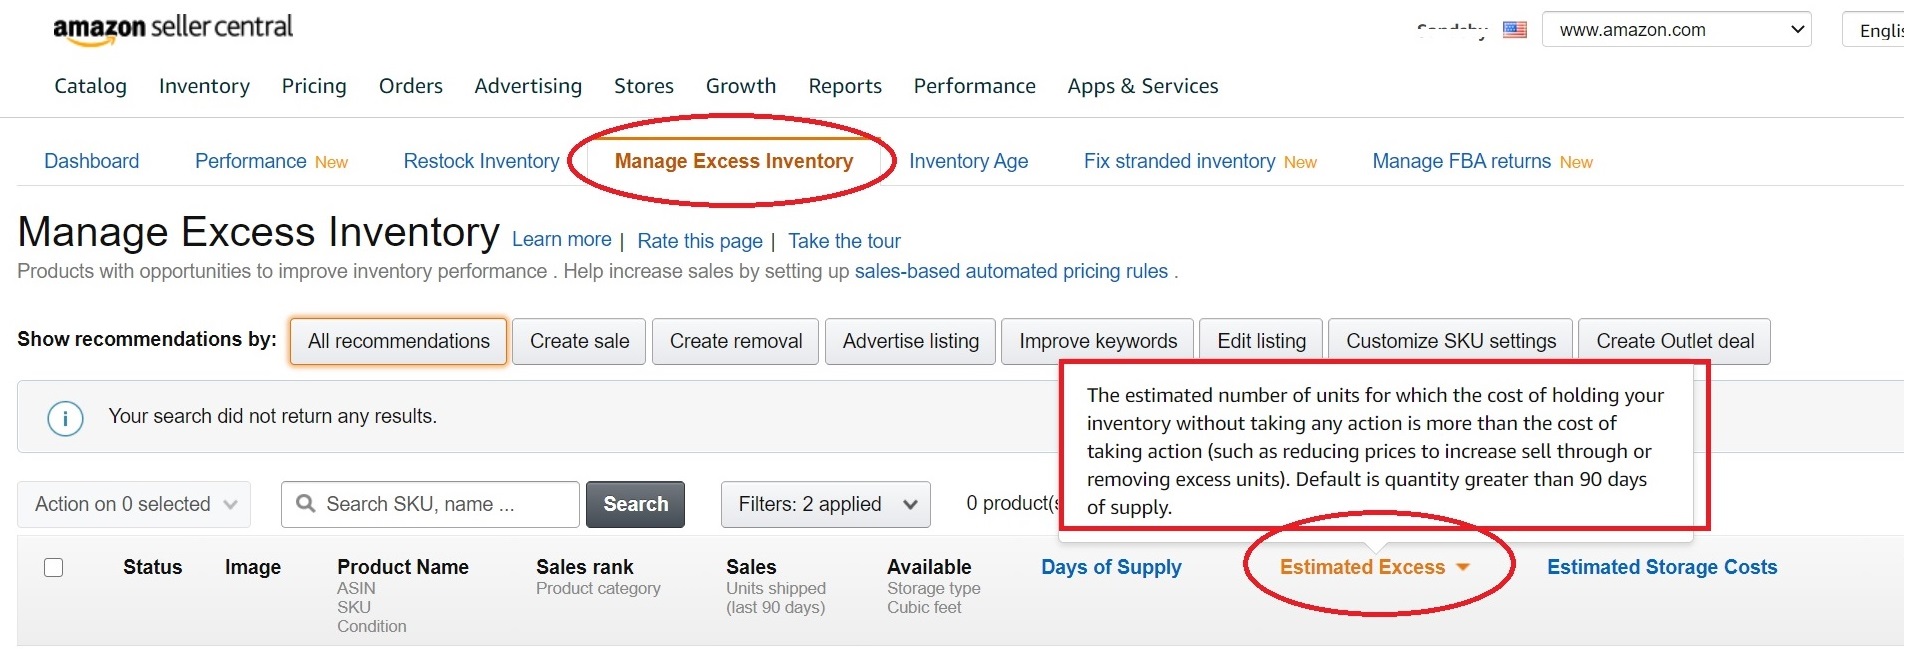 Amazon's tool Manage Excess Inventory 